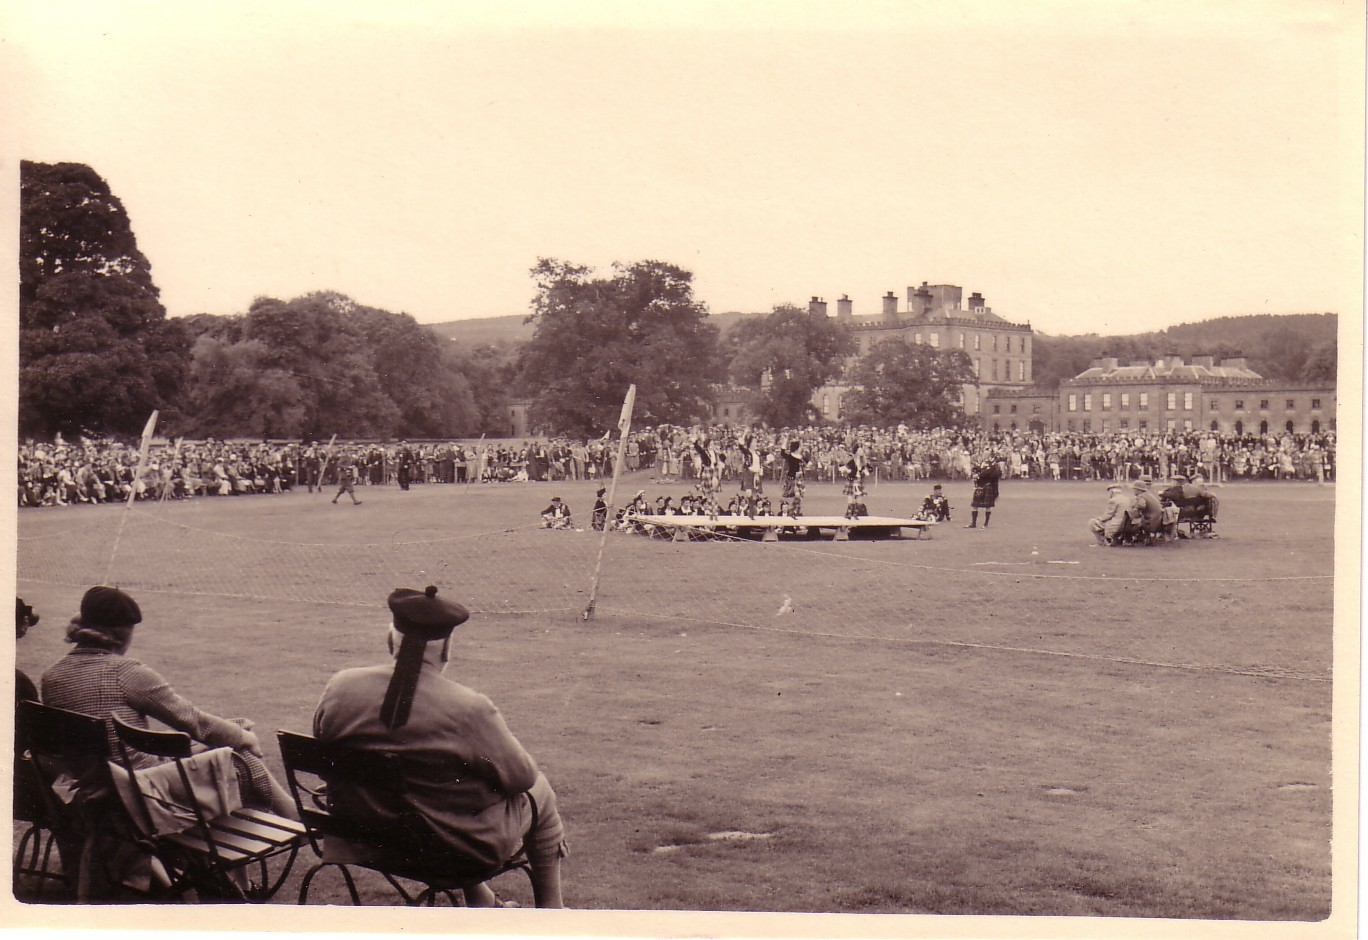 About 30,000 people attended the glory years of the Gordon Castle Highland Games in the 1930s.